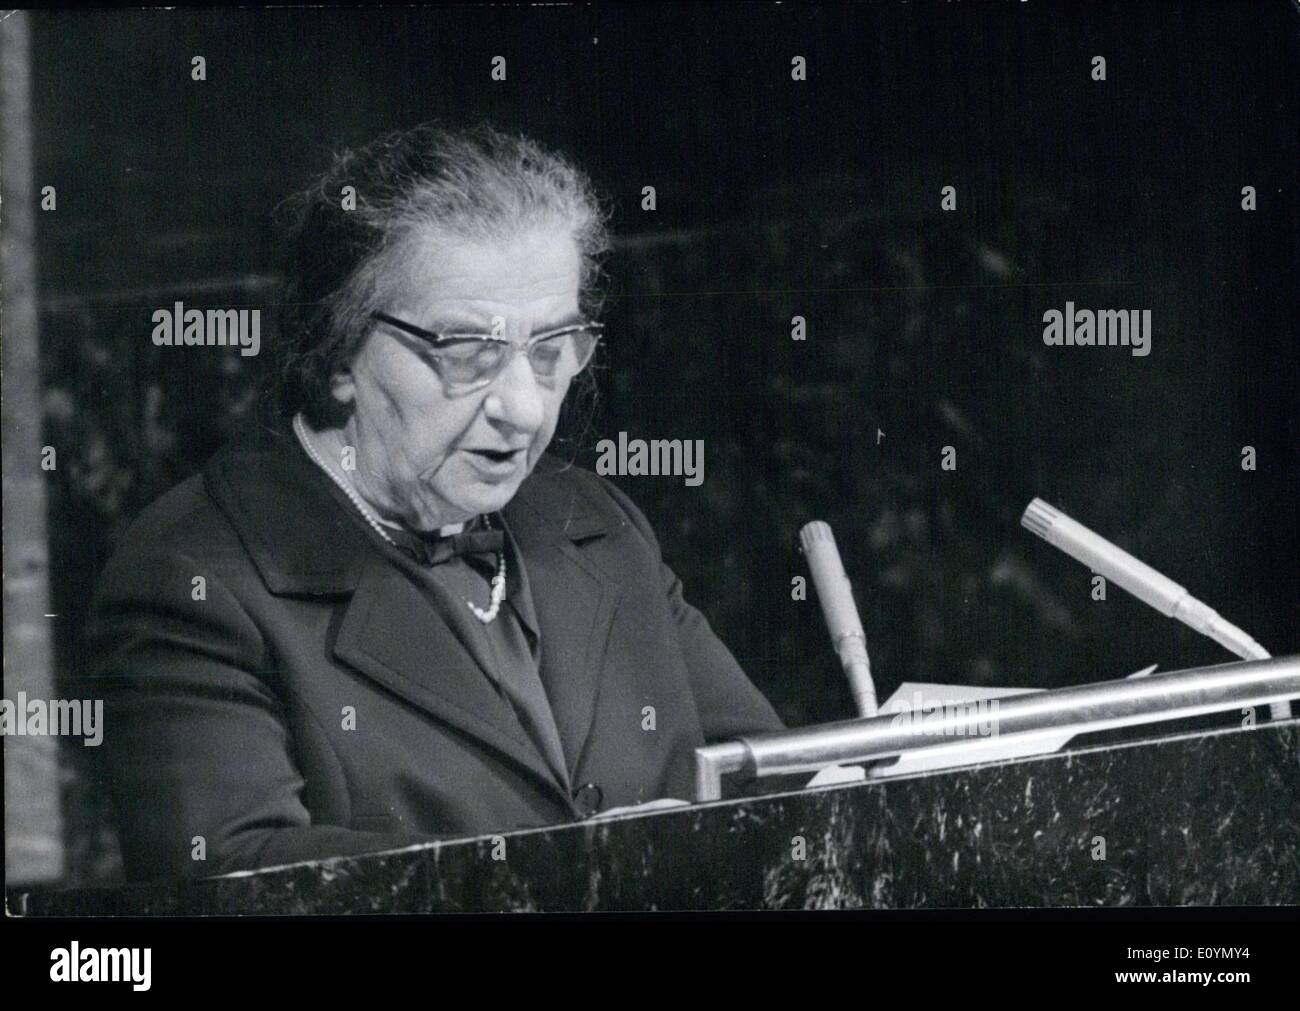 Oct. 27, 1970 - Israel Prime Minister Golda Meir at the UN Stock Photo